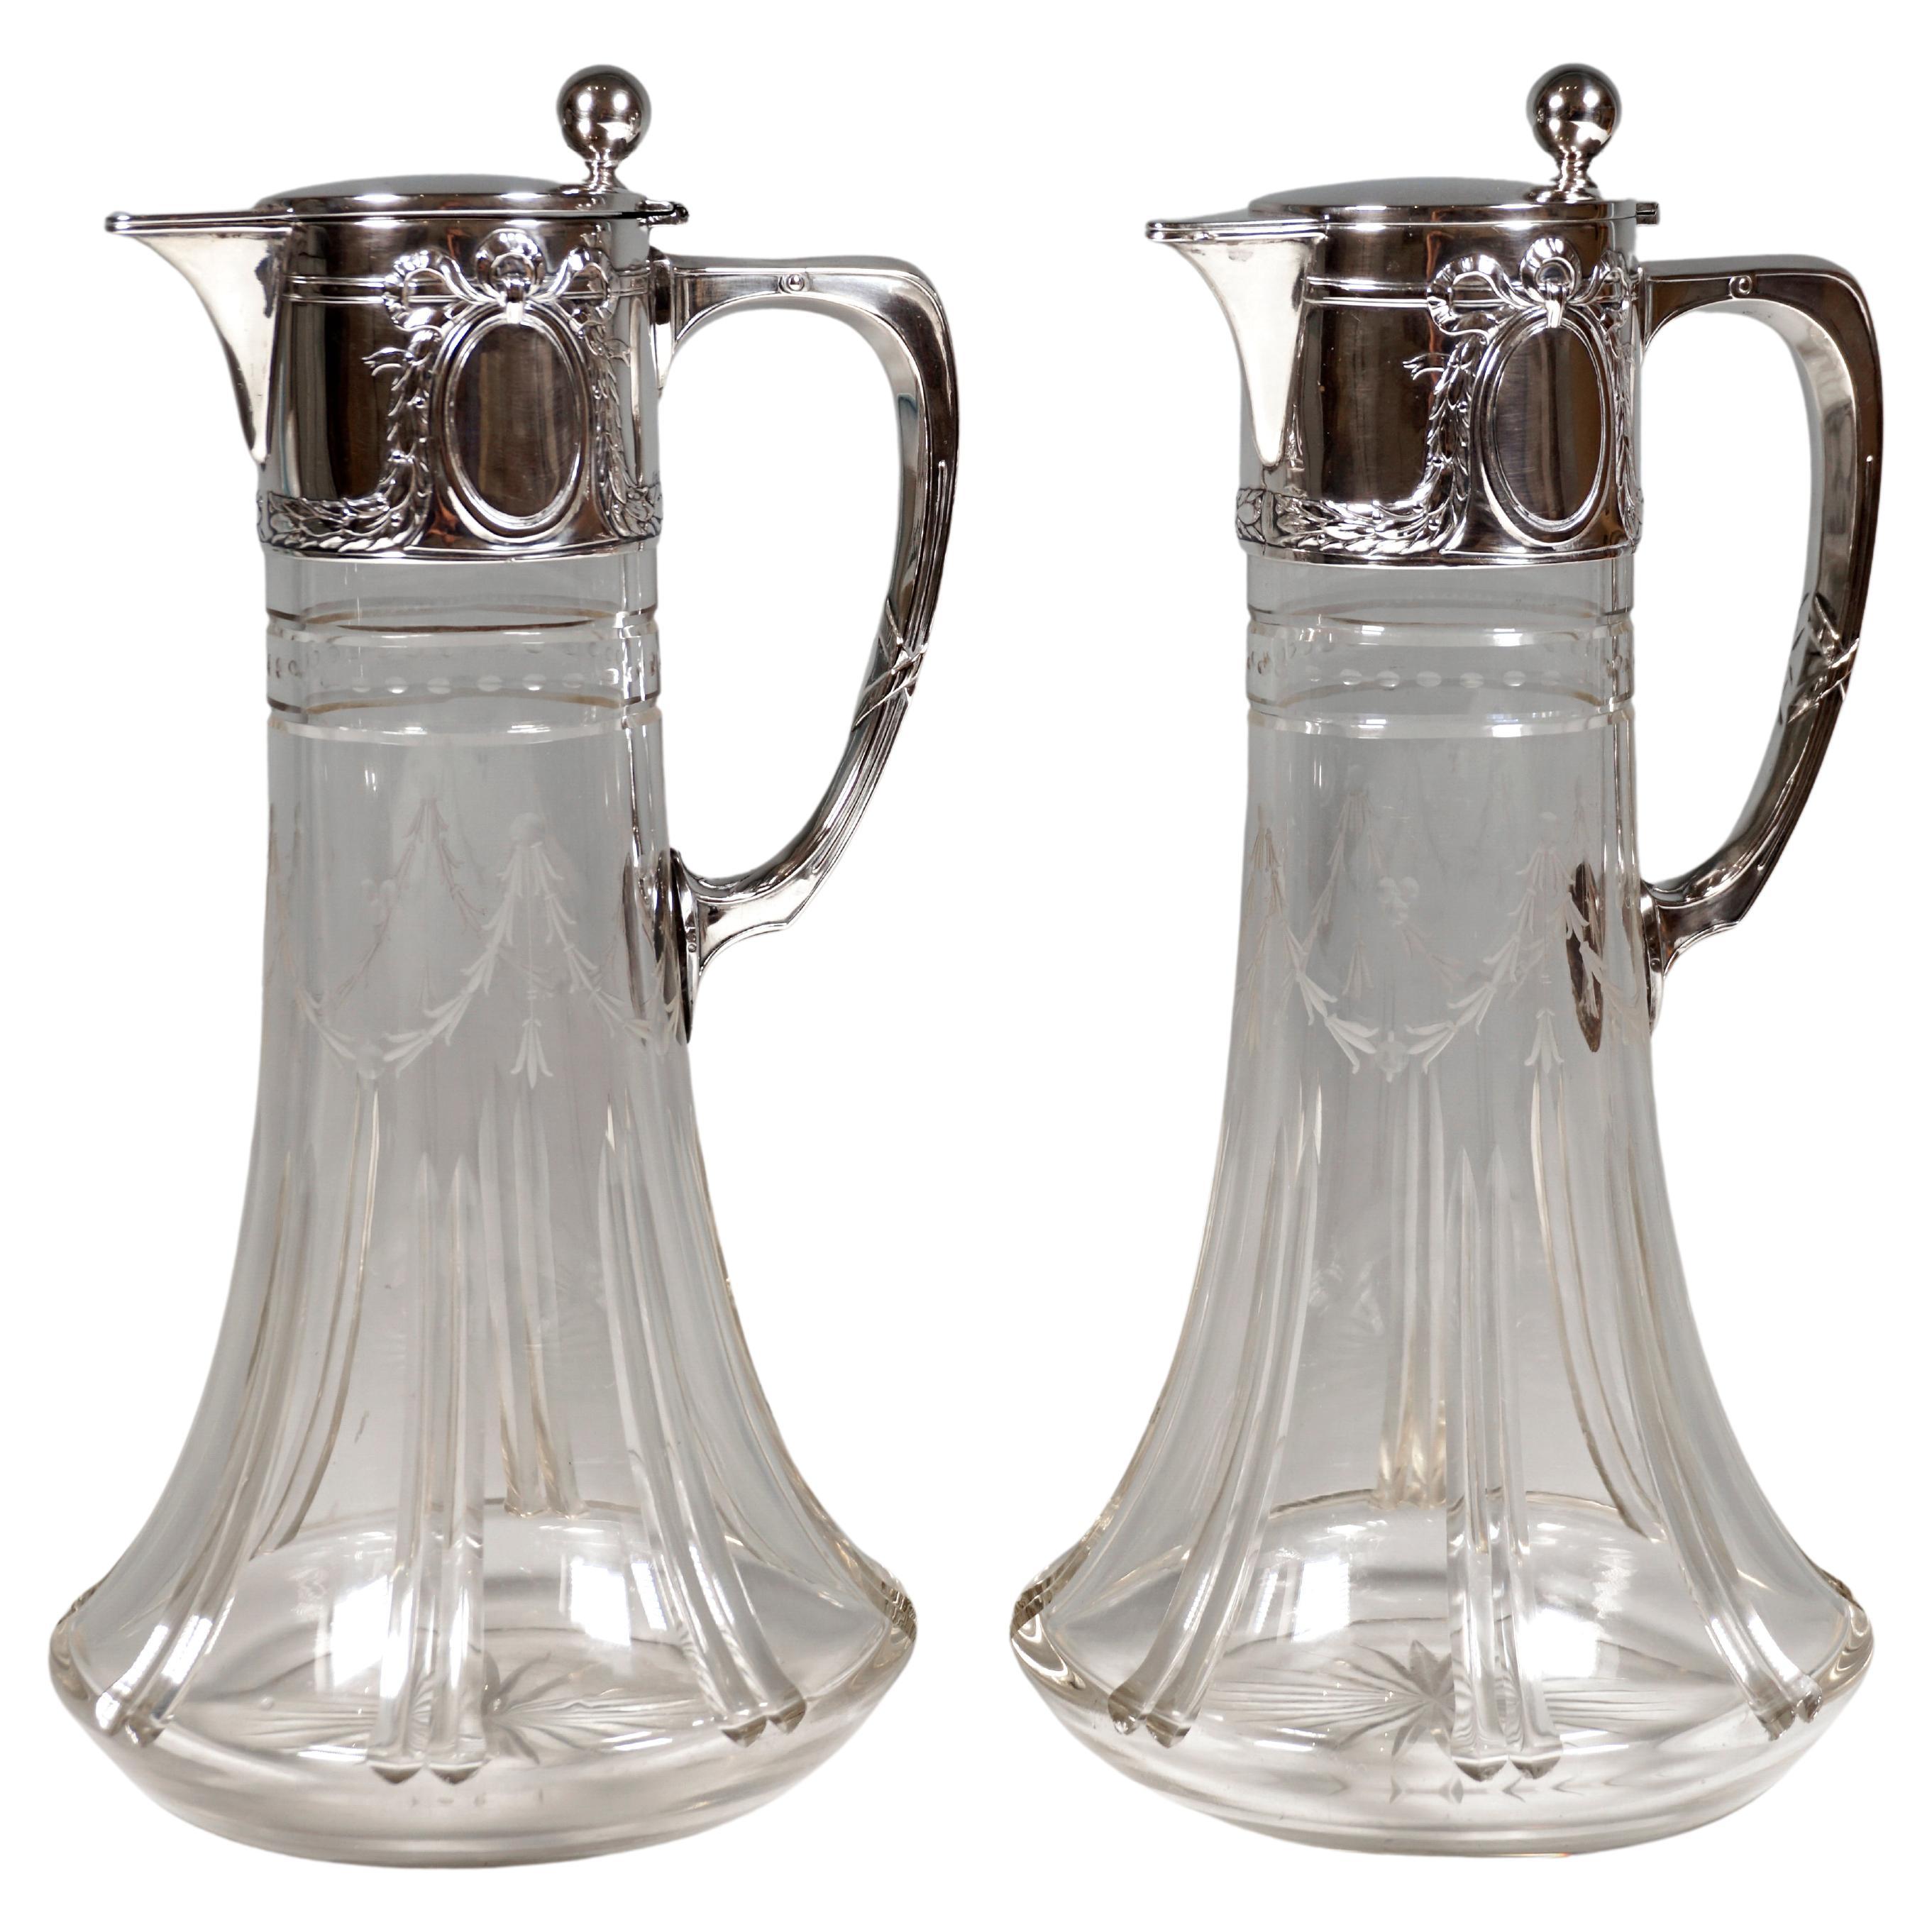 Pair of Art Nouveau Glass Decanter with Silver Fittings, Wilhelm Binder, Germany